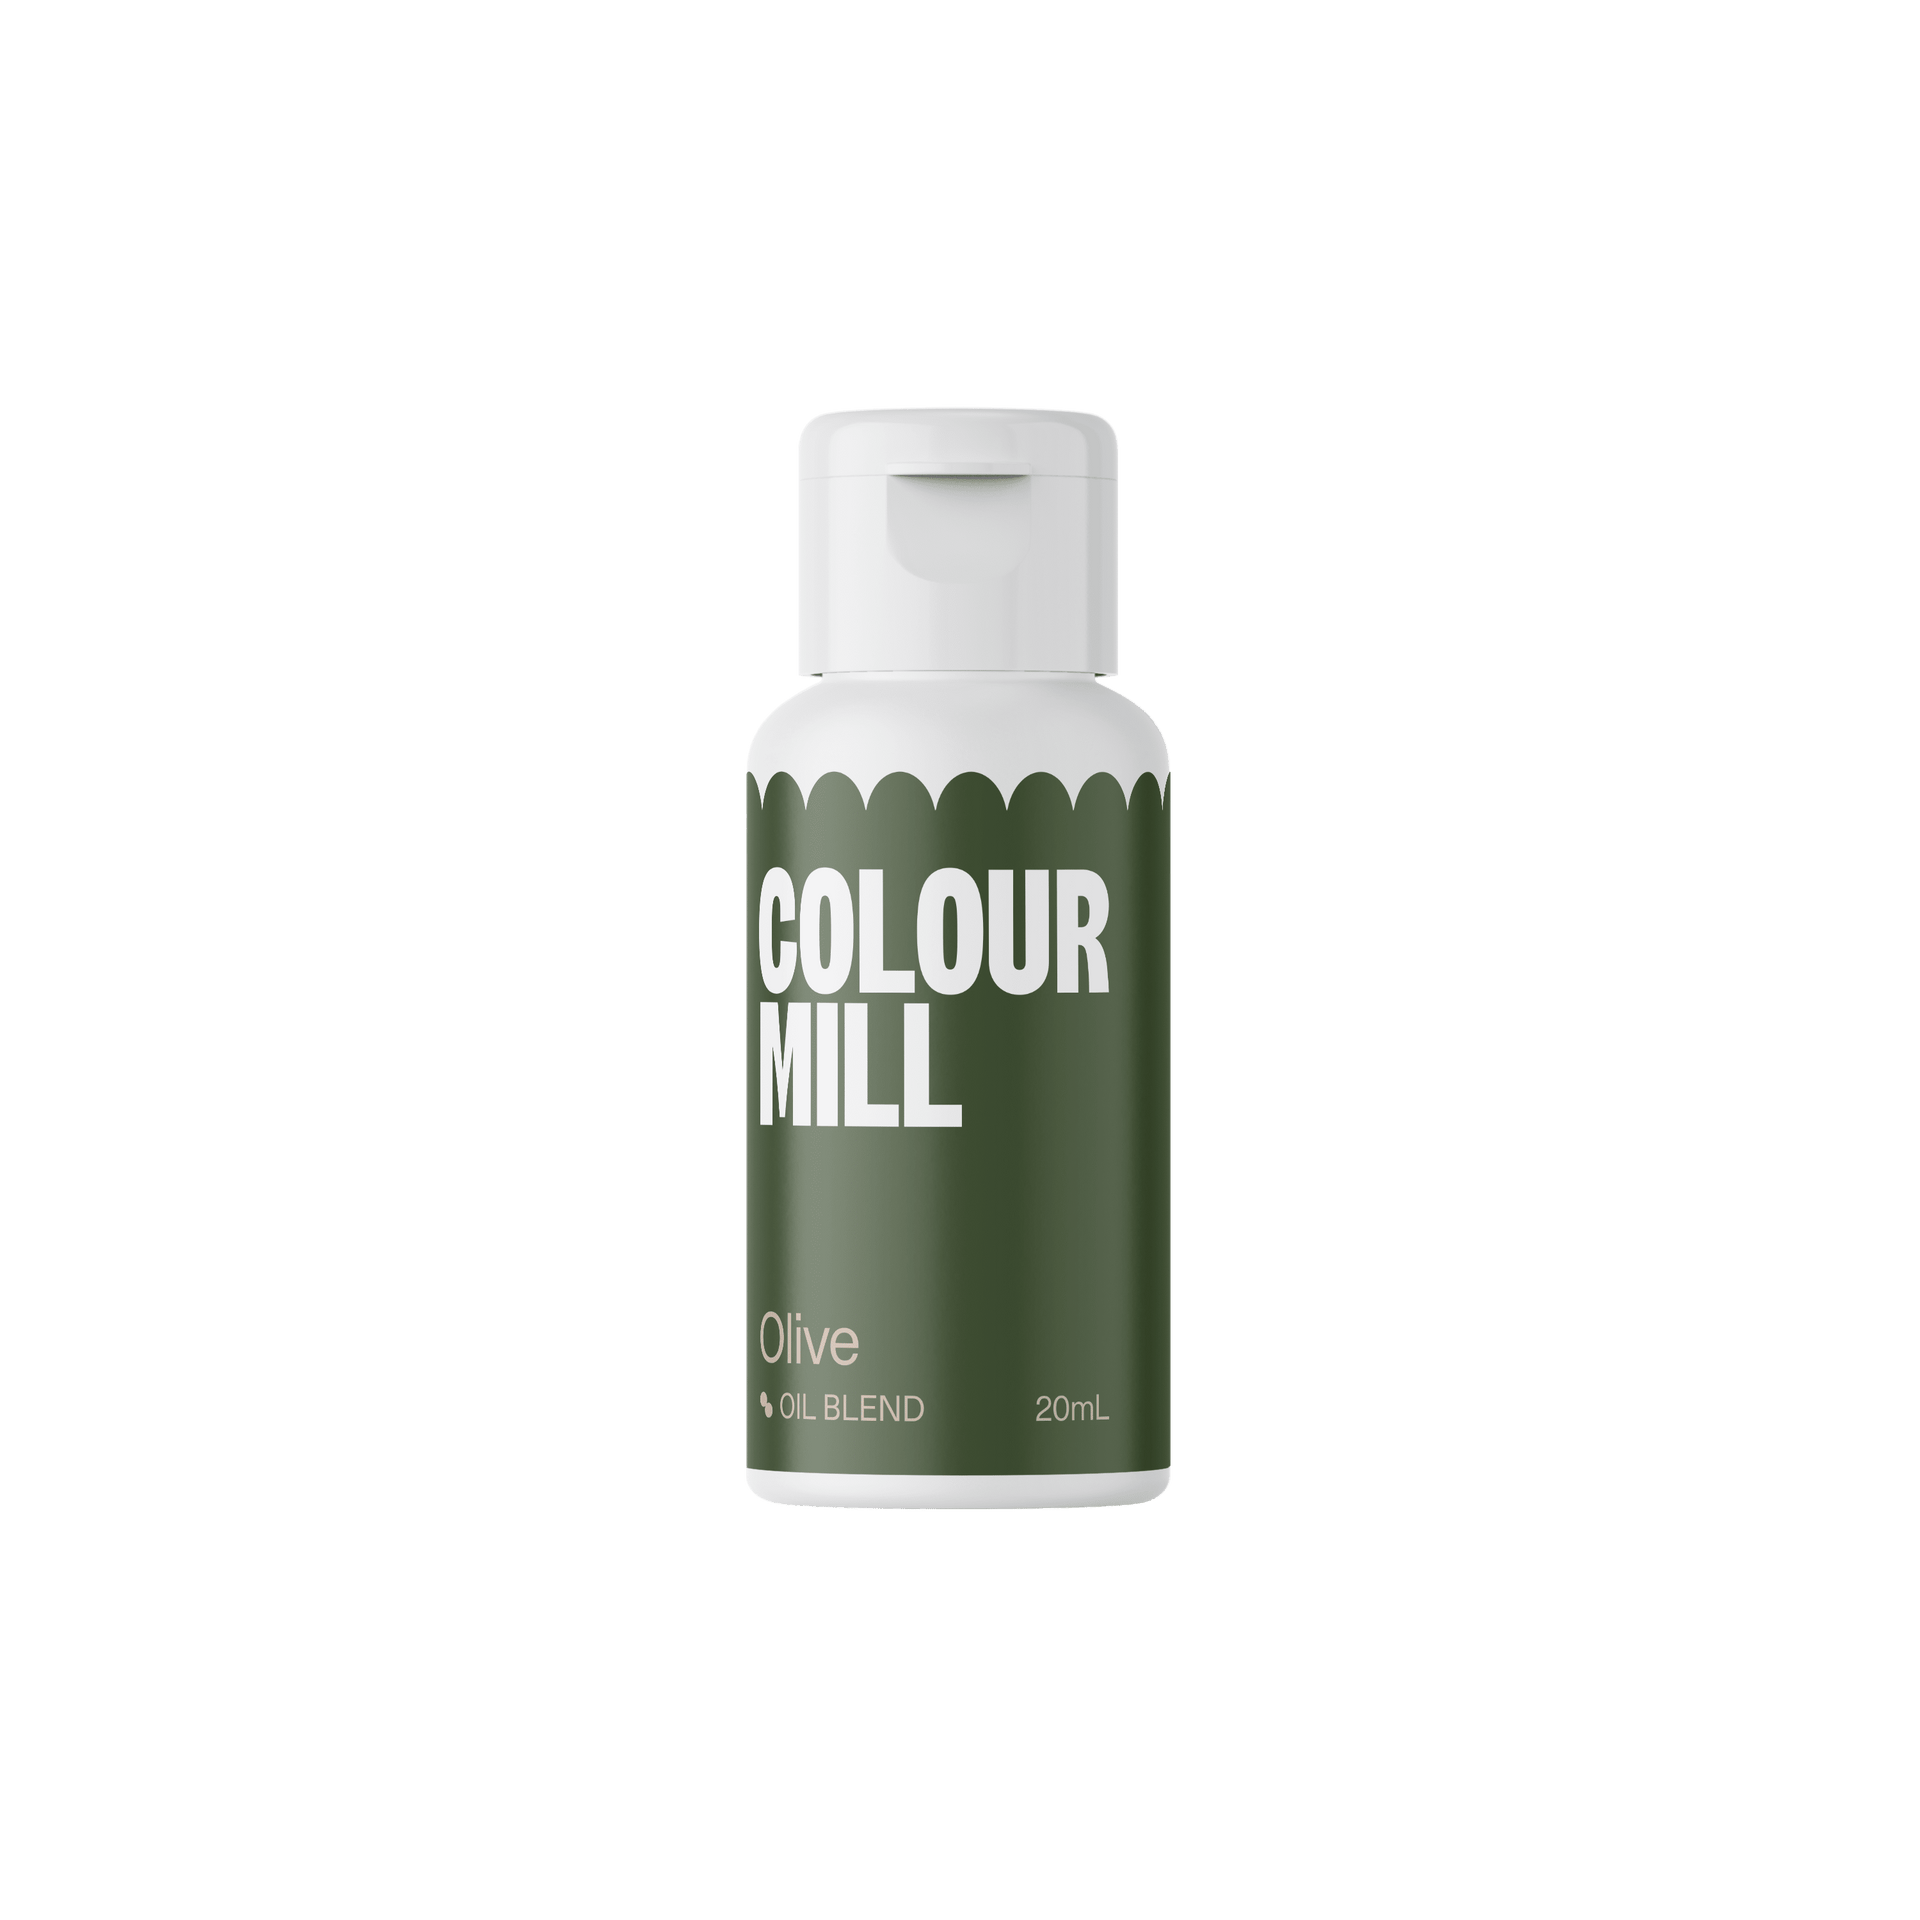 Colour Mill - Oil Based Food Colouring - 20ml Food Colouring Colour Mill Olive 